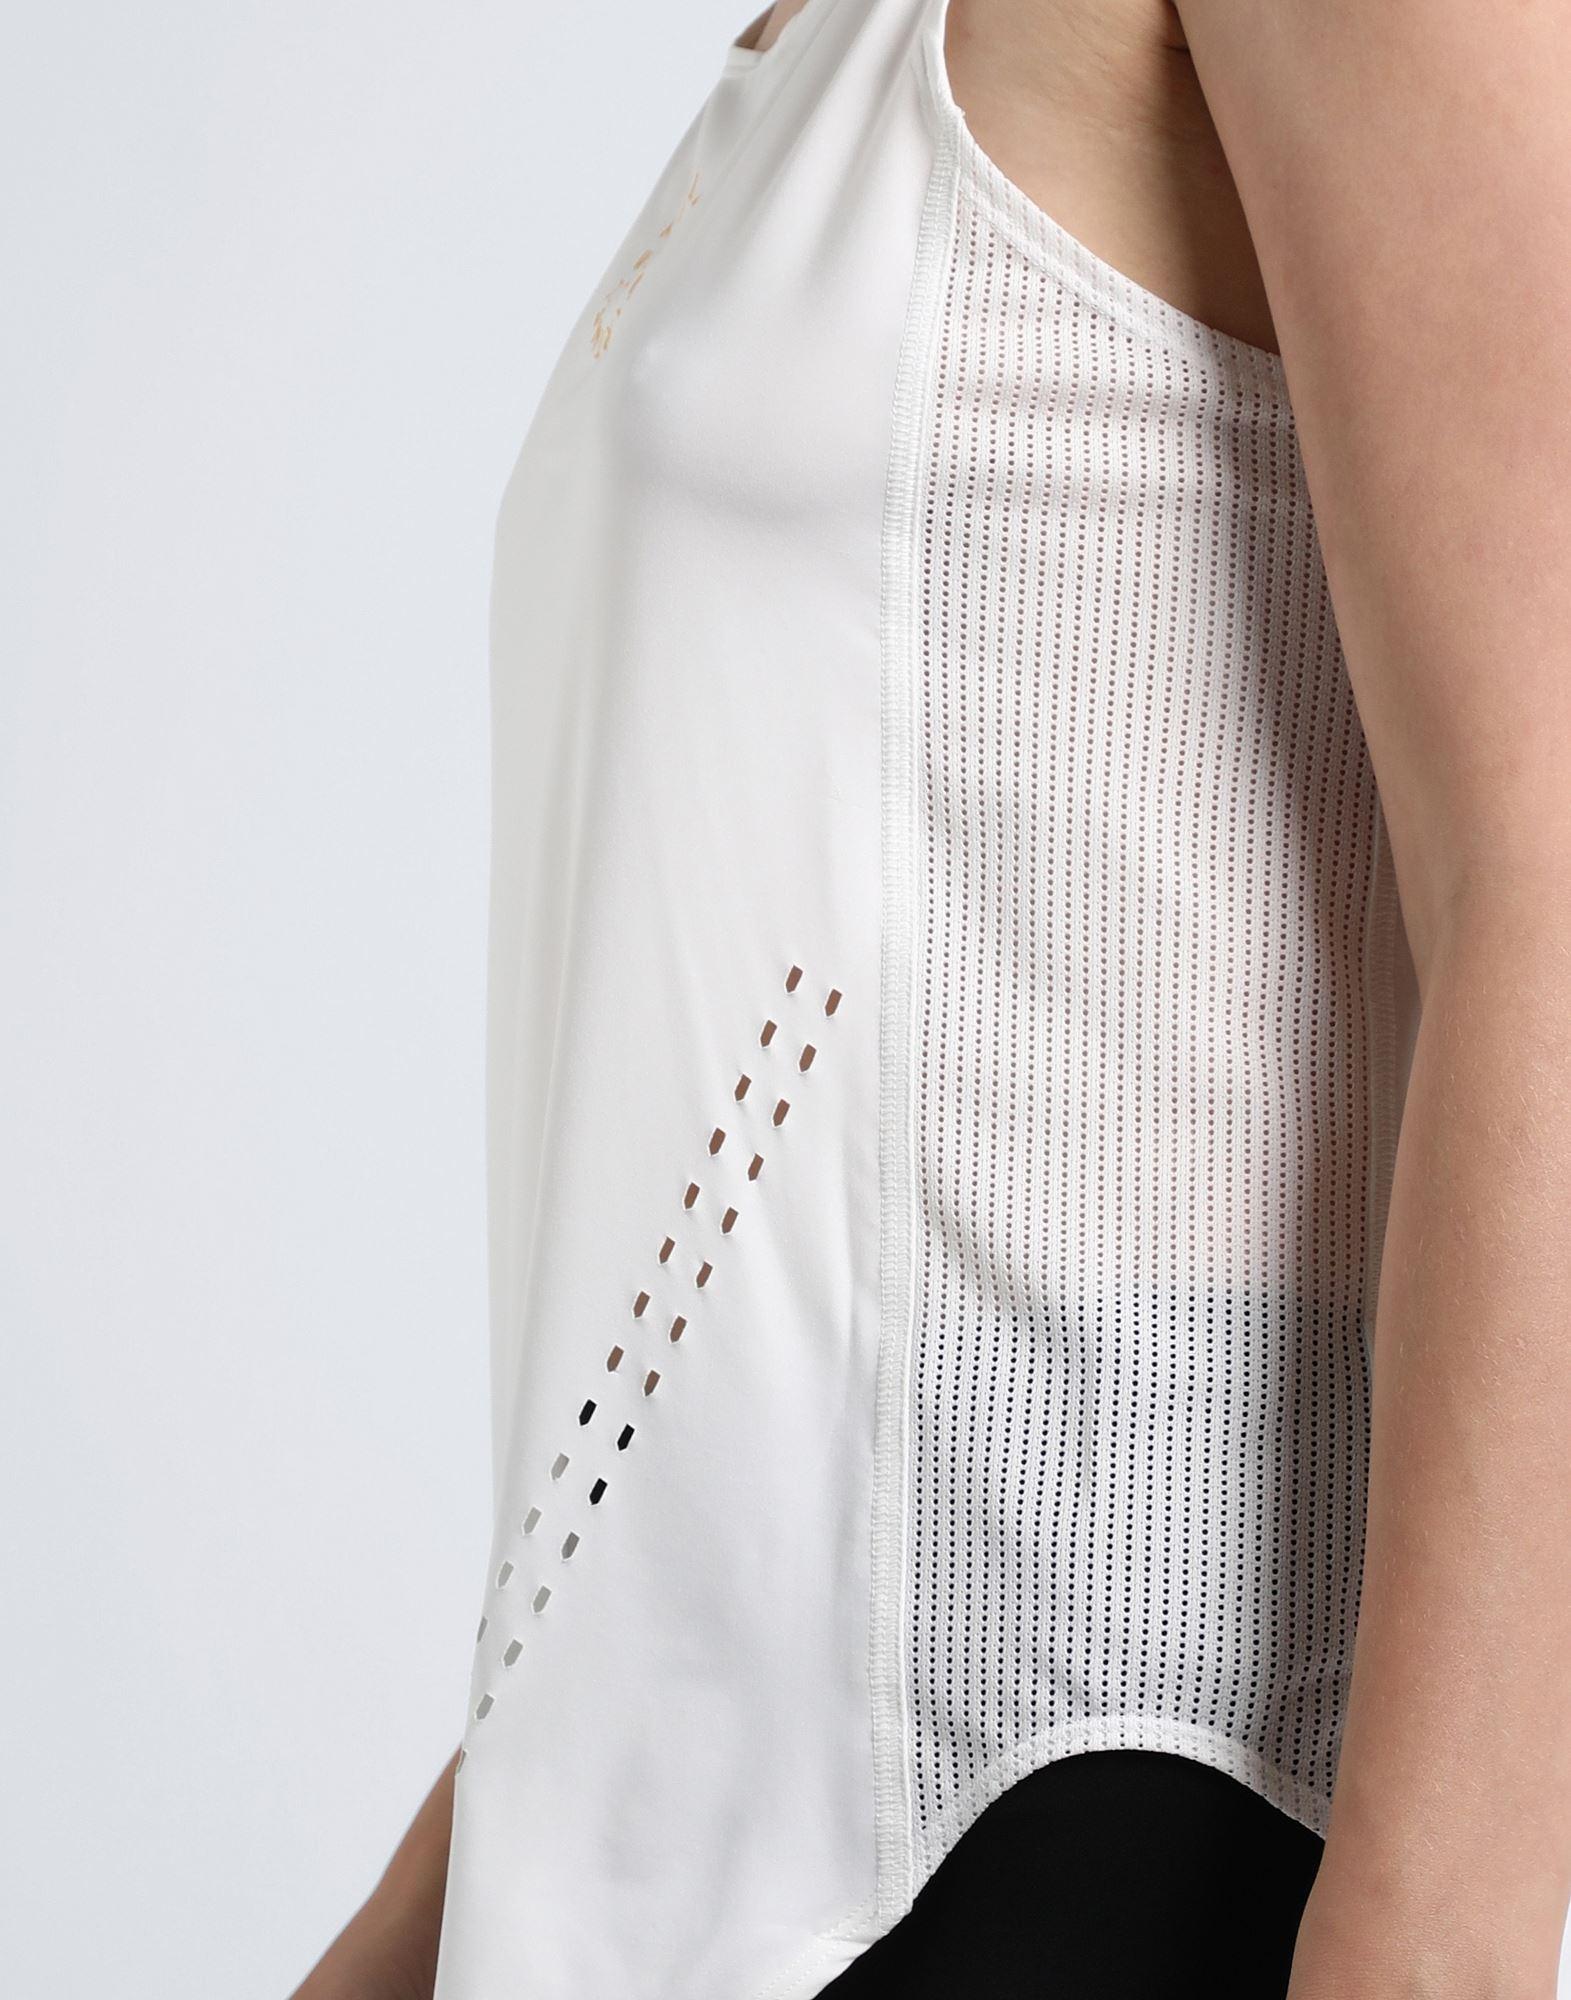 adidas By Stella McCartney Synthetic Tank Top in White - Lyst